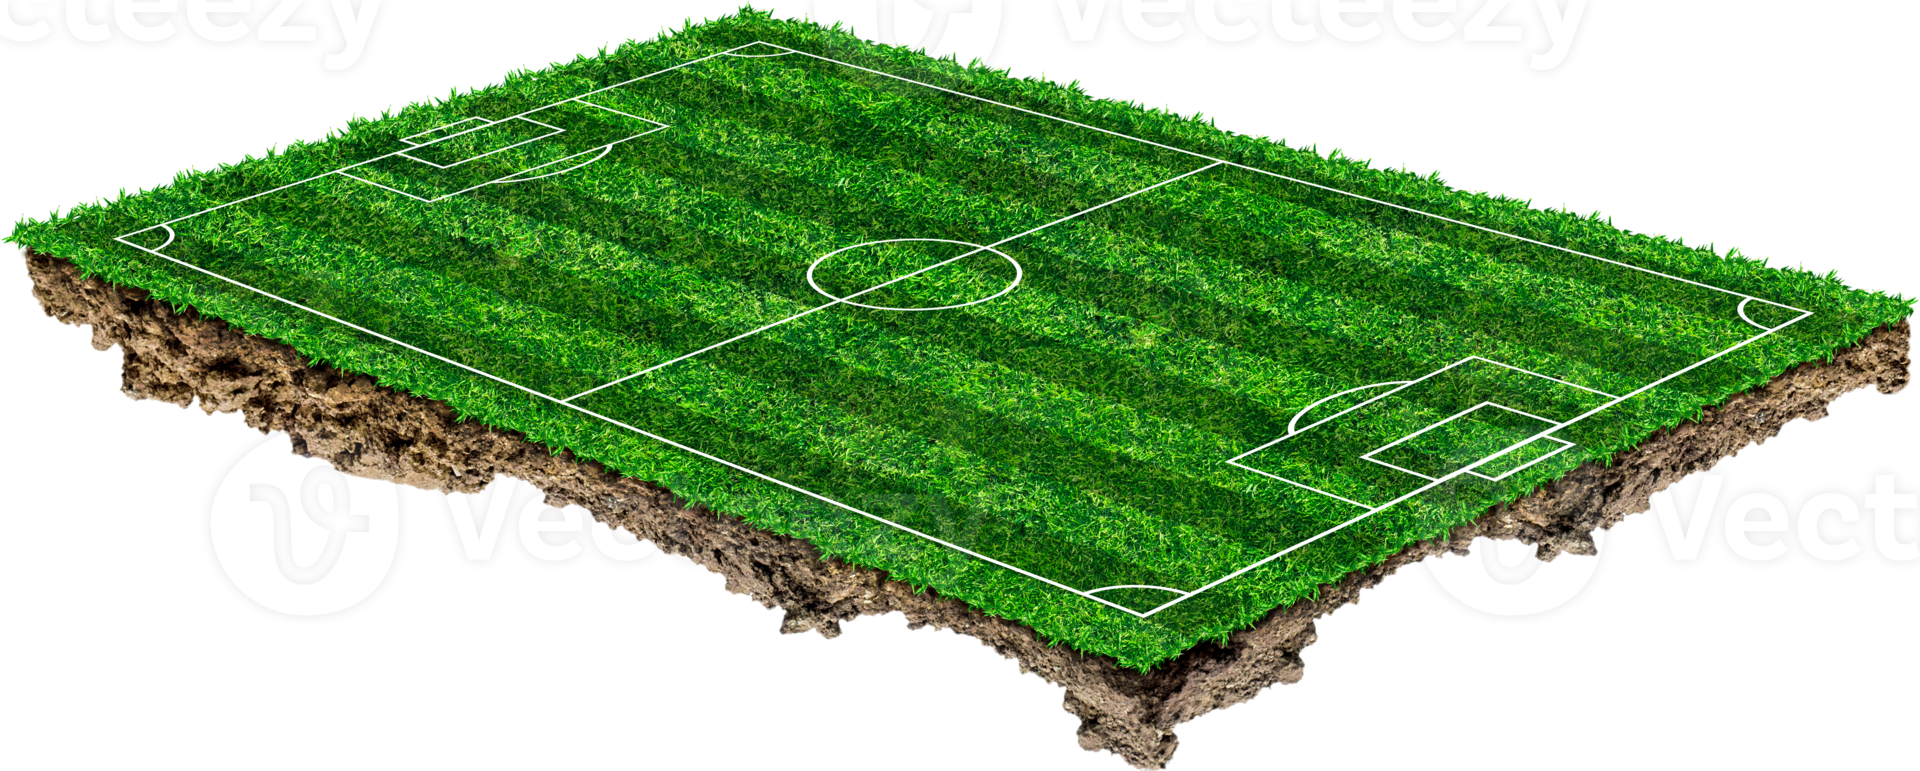 3d soccer field isolated png